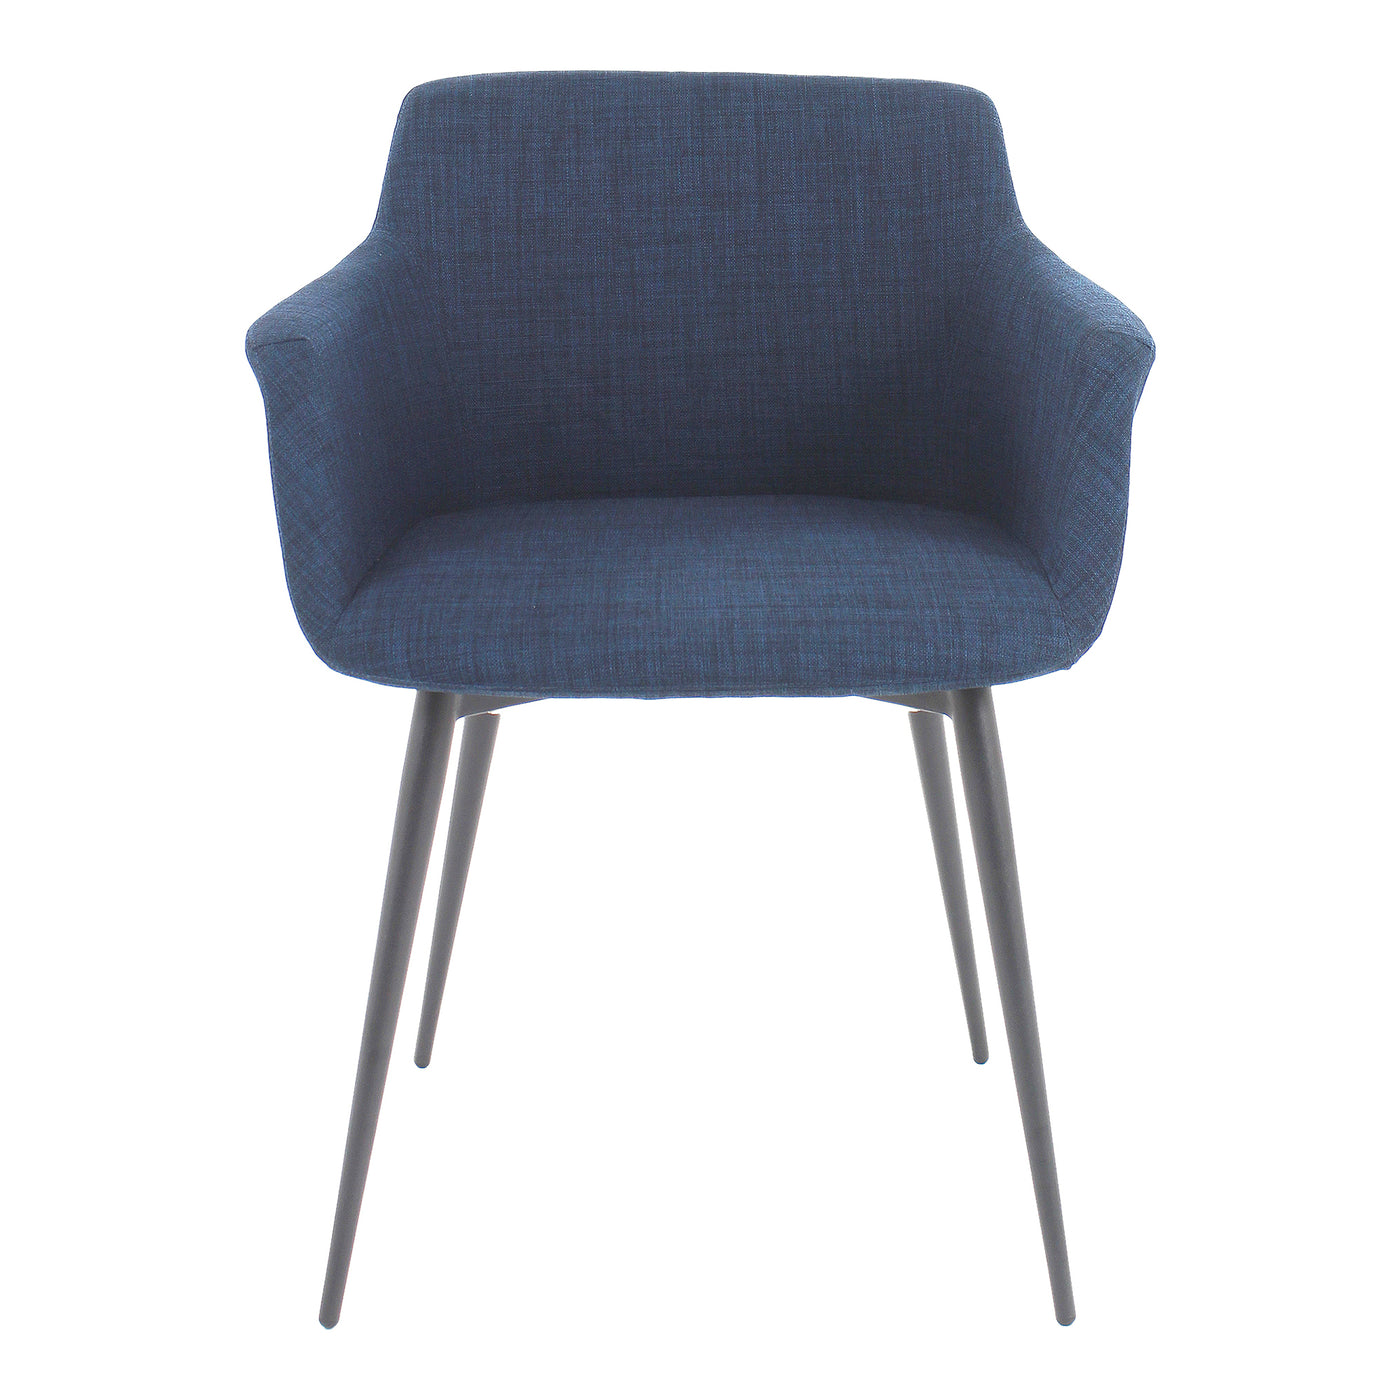 The Ronda arm chair is a classic mid-century design with a contemporary twist. Made with 100% polyester fabric and steel l...